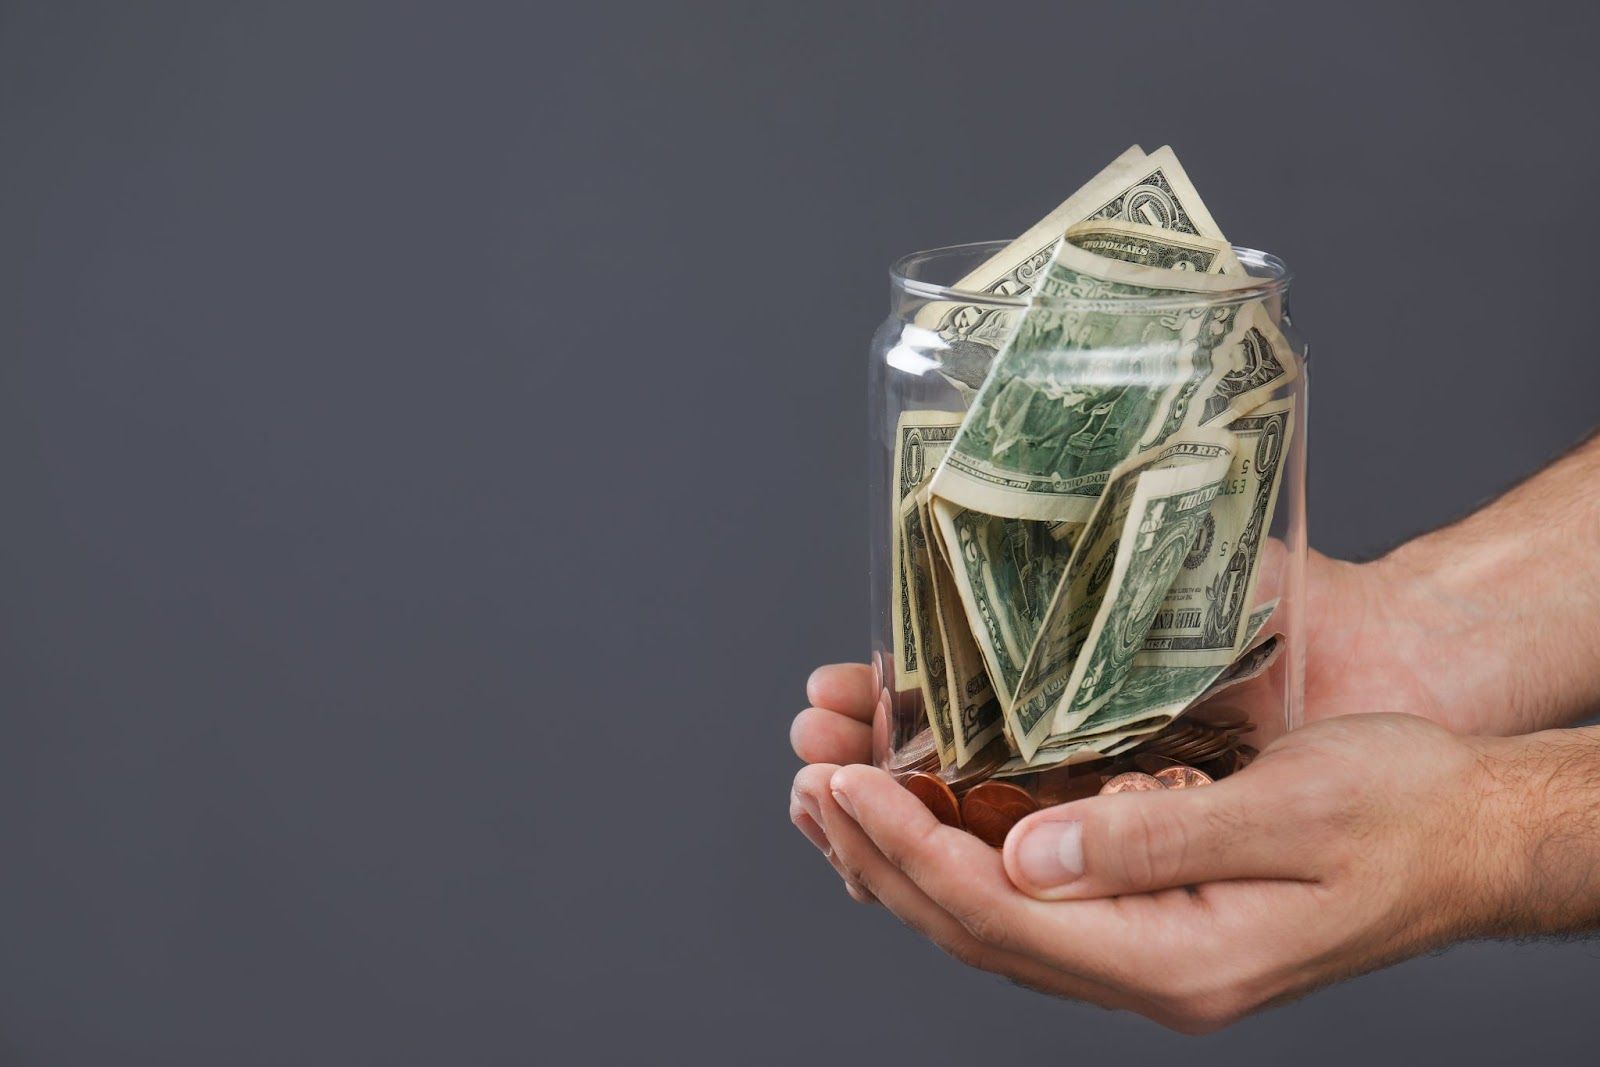 Cupped hands hold glass jar of dollar bills, against a gray background